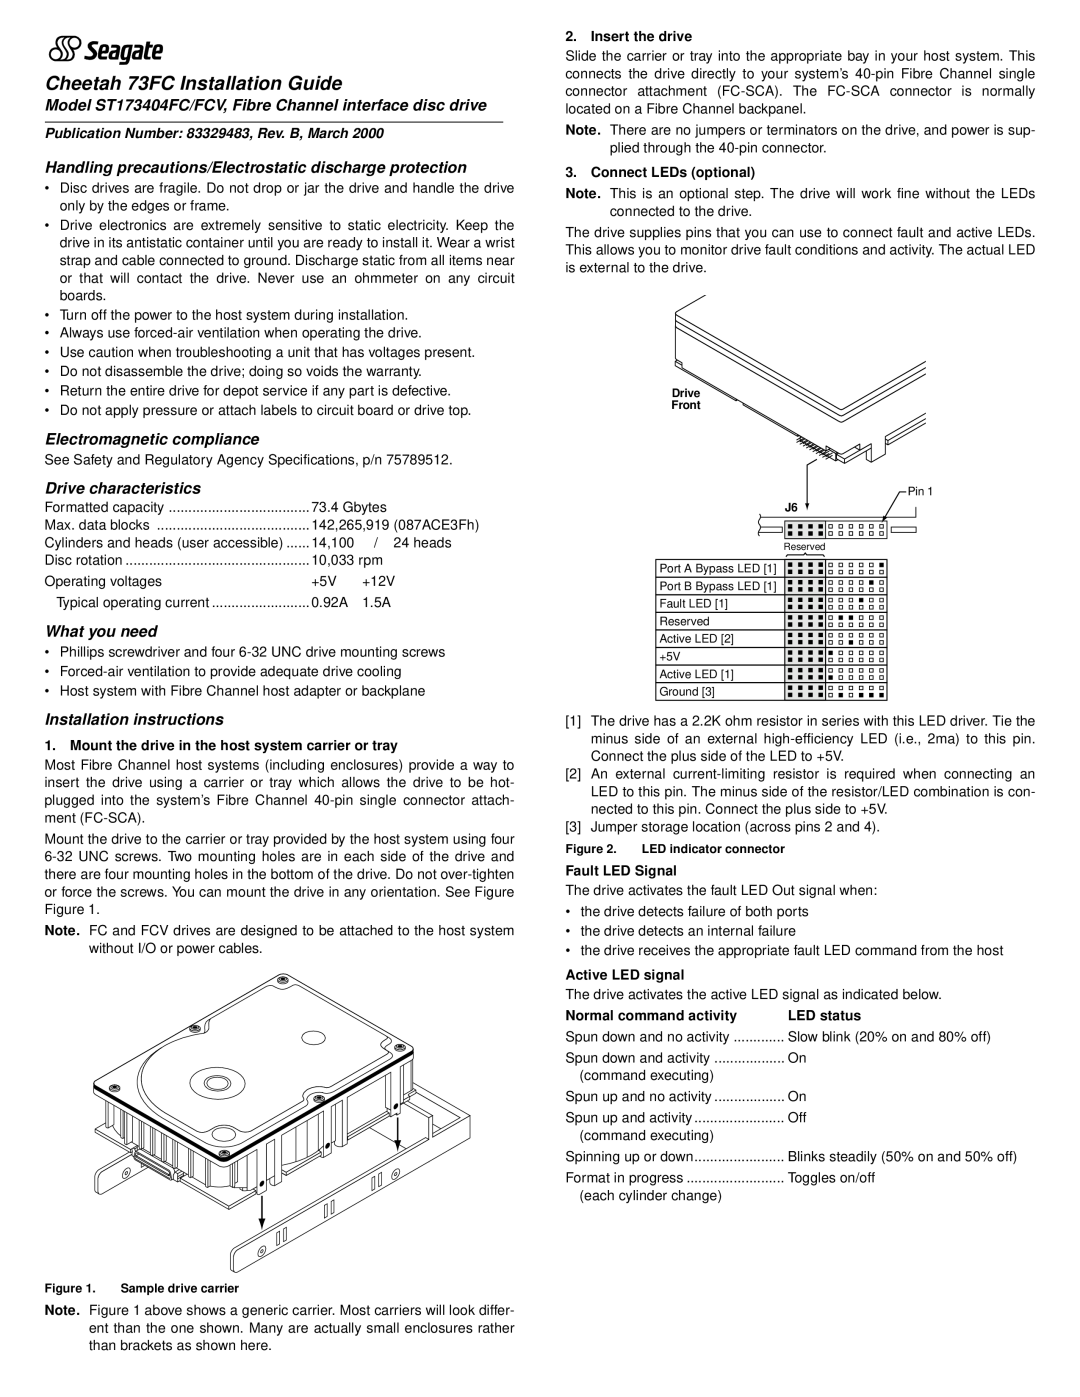 Seagate installation instructions Model ST173404FC/FCV, Fibre Channel interface disc drive, Electromagnetic compliance 